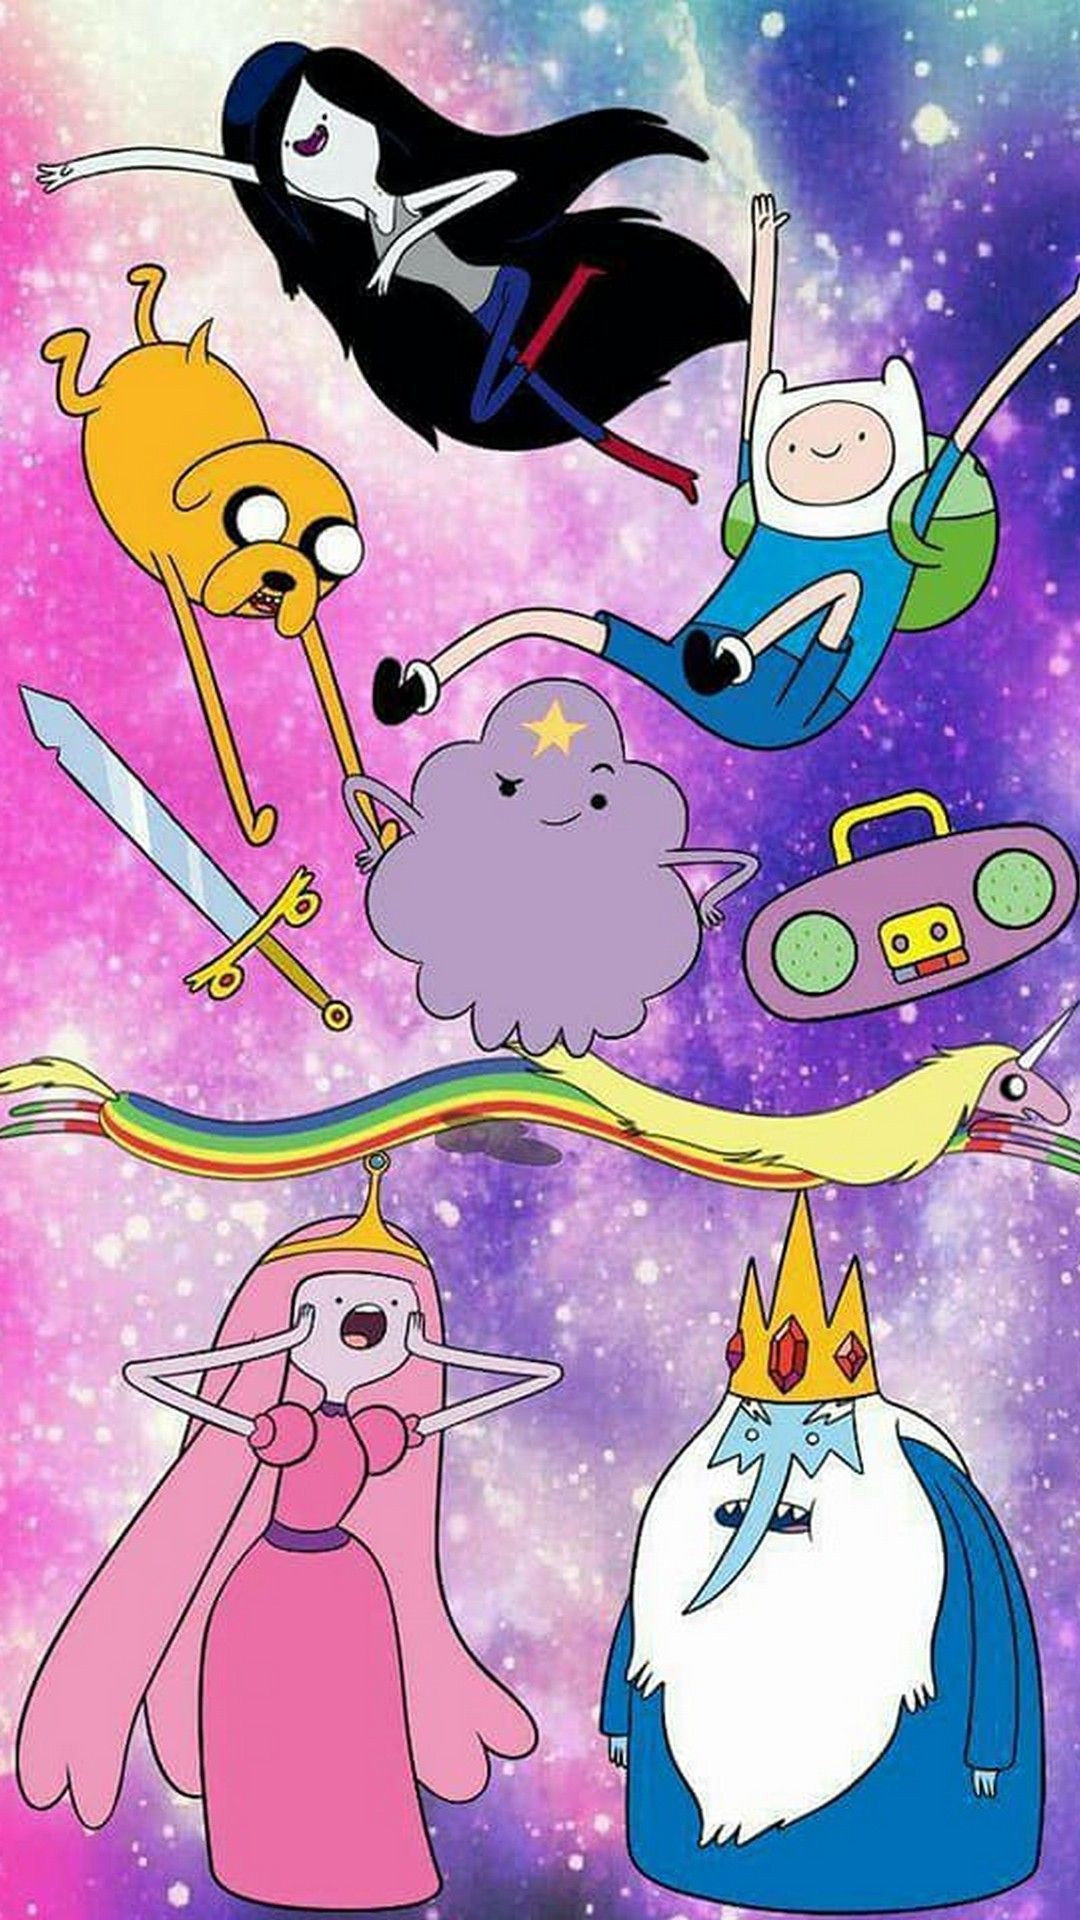 Adventure Time Wallpaper For iPhone with high-resolution 1080x1920 pixel. You can use this wallpaper for your iPhone 5, 6, 7, 8, X, XS, XR backgrounds, Mobile Screensaver, or iPad Lock Screen - Adventure Time